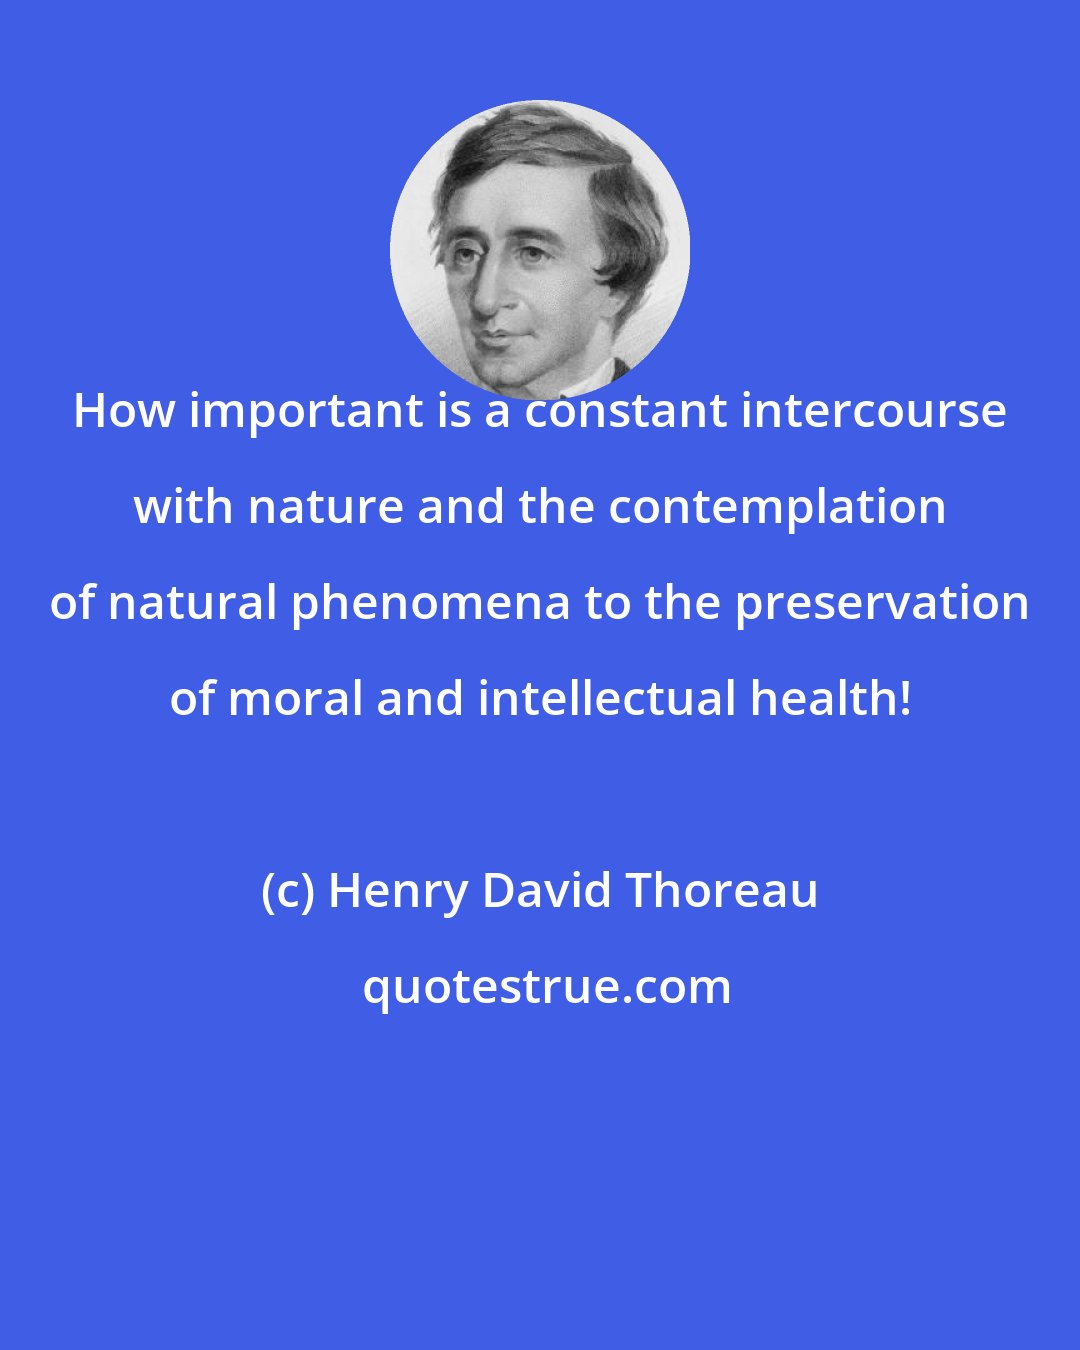 Henry David Thoreau: How important is a constant intercourse with nature and the contemplation of natural phenomena to the preservation of moral and intellectual health!